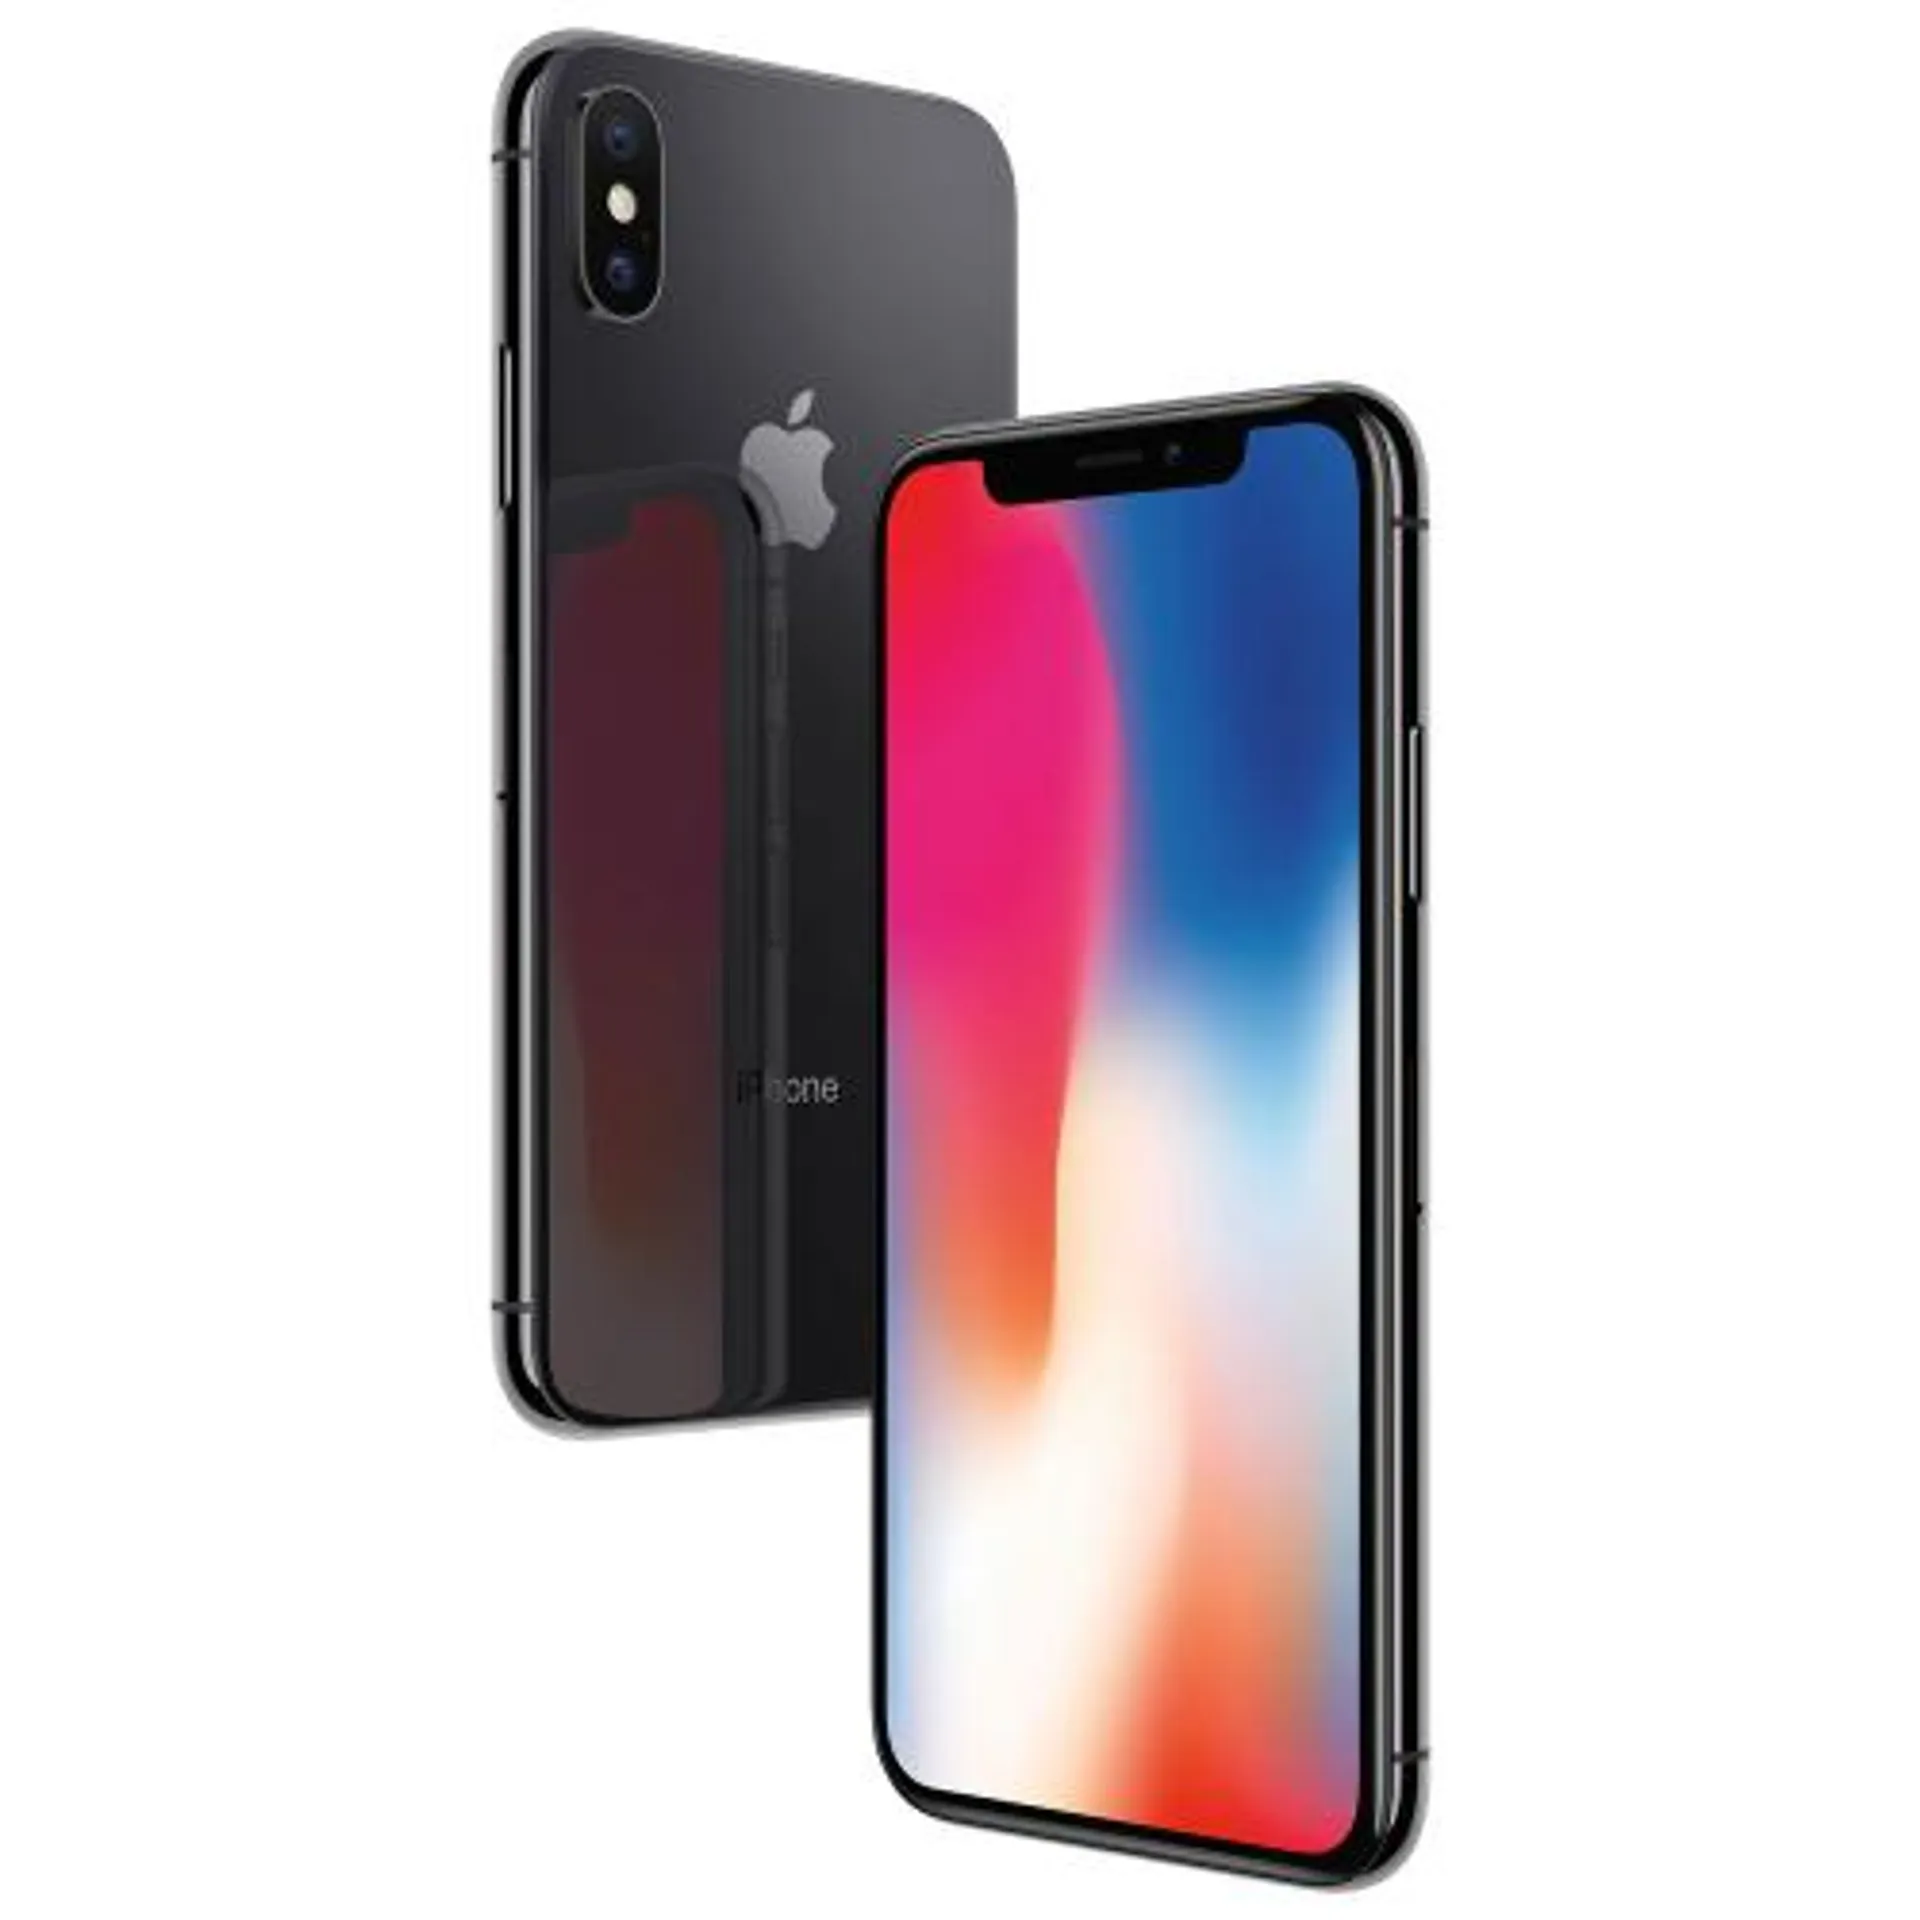 Refurbished (Excellent) - Apple iPhone X 64GB Unlocked - Space Grey - Refurbished, Mint Condition